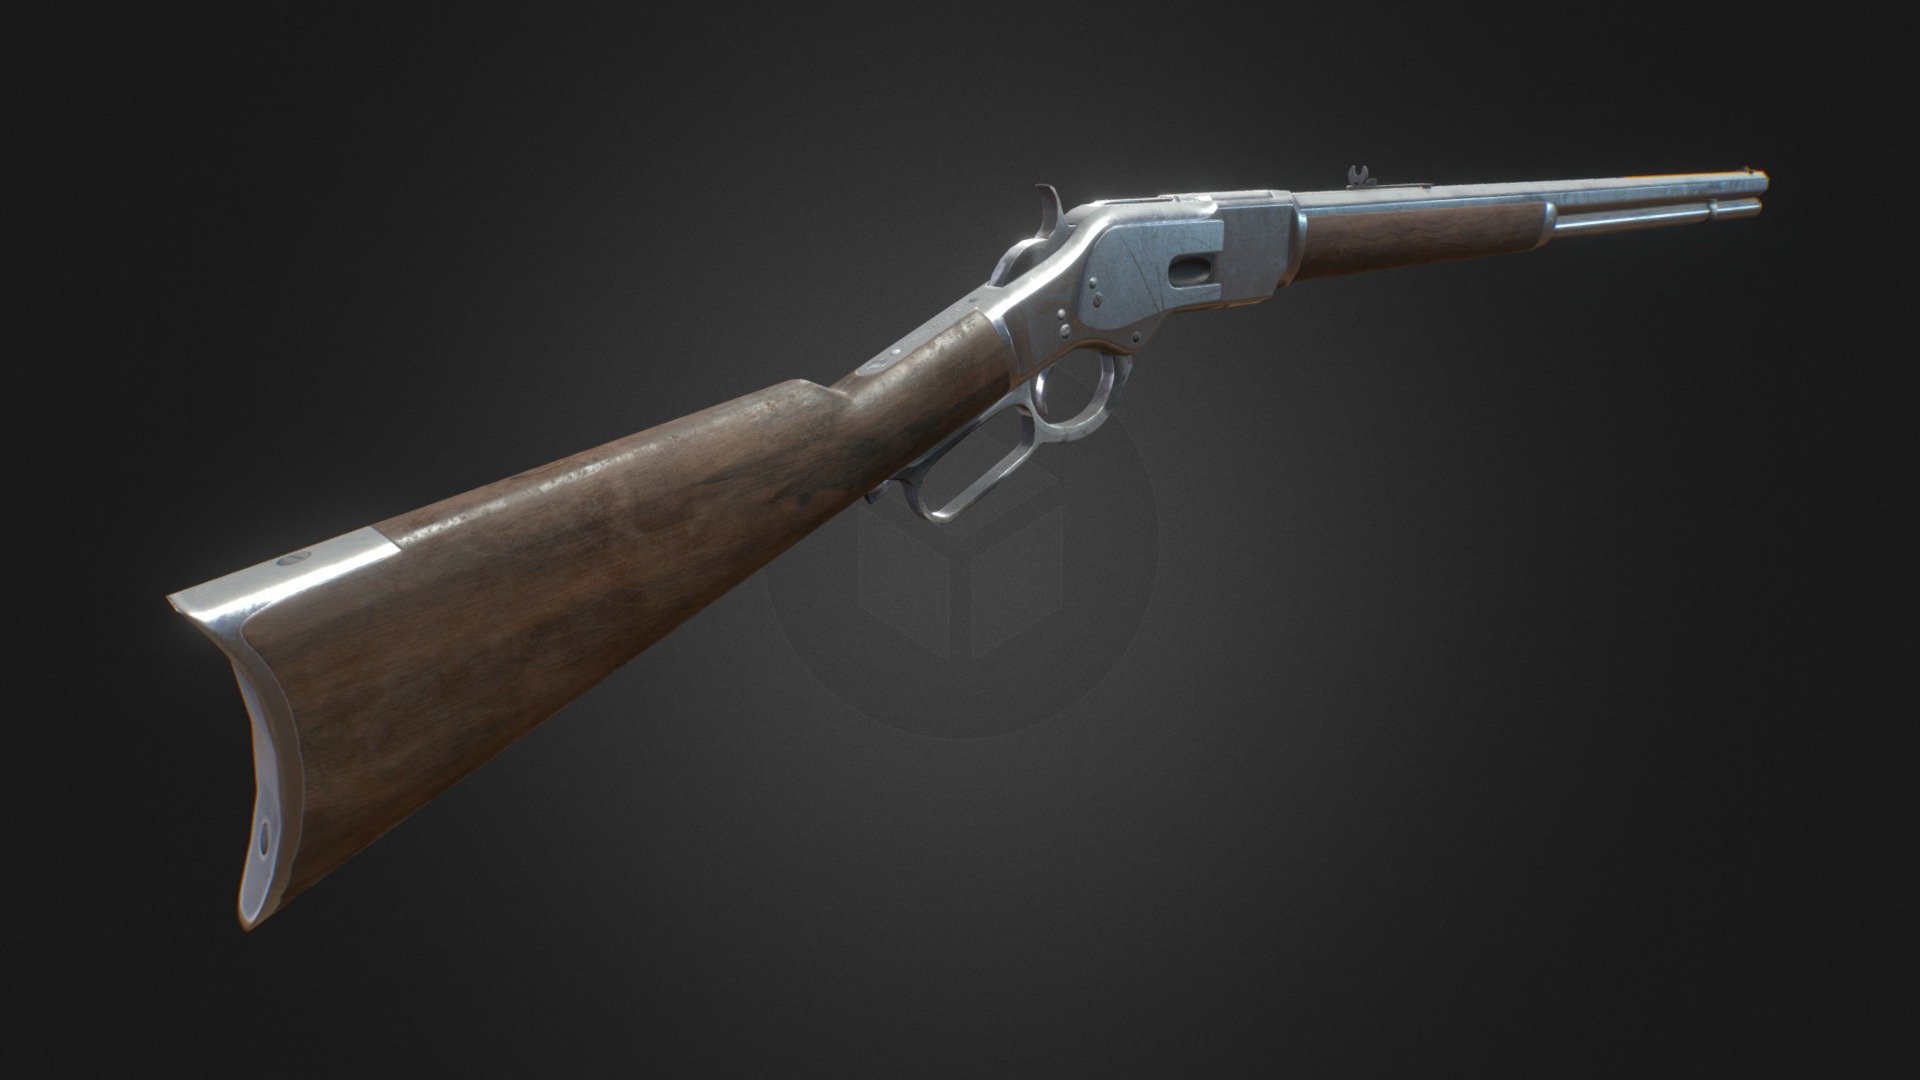 A model of a Winchester 73, created for a VR game currently in development. Said to be &lsquo;the rifle that won the west', with its lever action mechanism it really is a marvel of engineering and design.

The model has been carefully crafted for use in the latest first or third person games with 4K PBR textures, and a modest polygon count. It is rigged, animated and ready to be dropped into your UE4 project, and can be fully customized to suit your needs. A .45 cartridge is also included (separate bullet and casing).

Technical Details

Lever Action Rifle (3,110 Tris / 3,348 Verts)

.45 Casing (84 Tris / 89 Verts)

.45 Bullet (168 Tris / 136 Verts)

3 Animation states inc; cocking, reloading and firing.

4K PBR Textures including: Albedo, Metalness, Roughness, Normal Map, and Ambient Occlusion 3d model